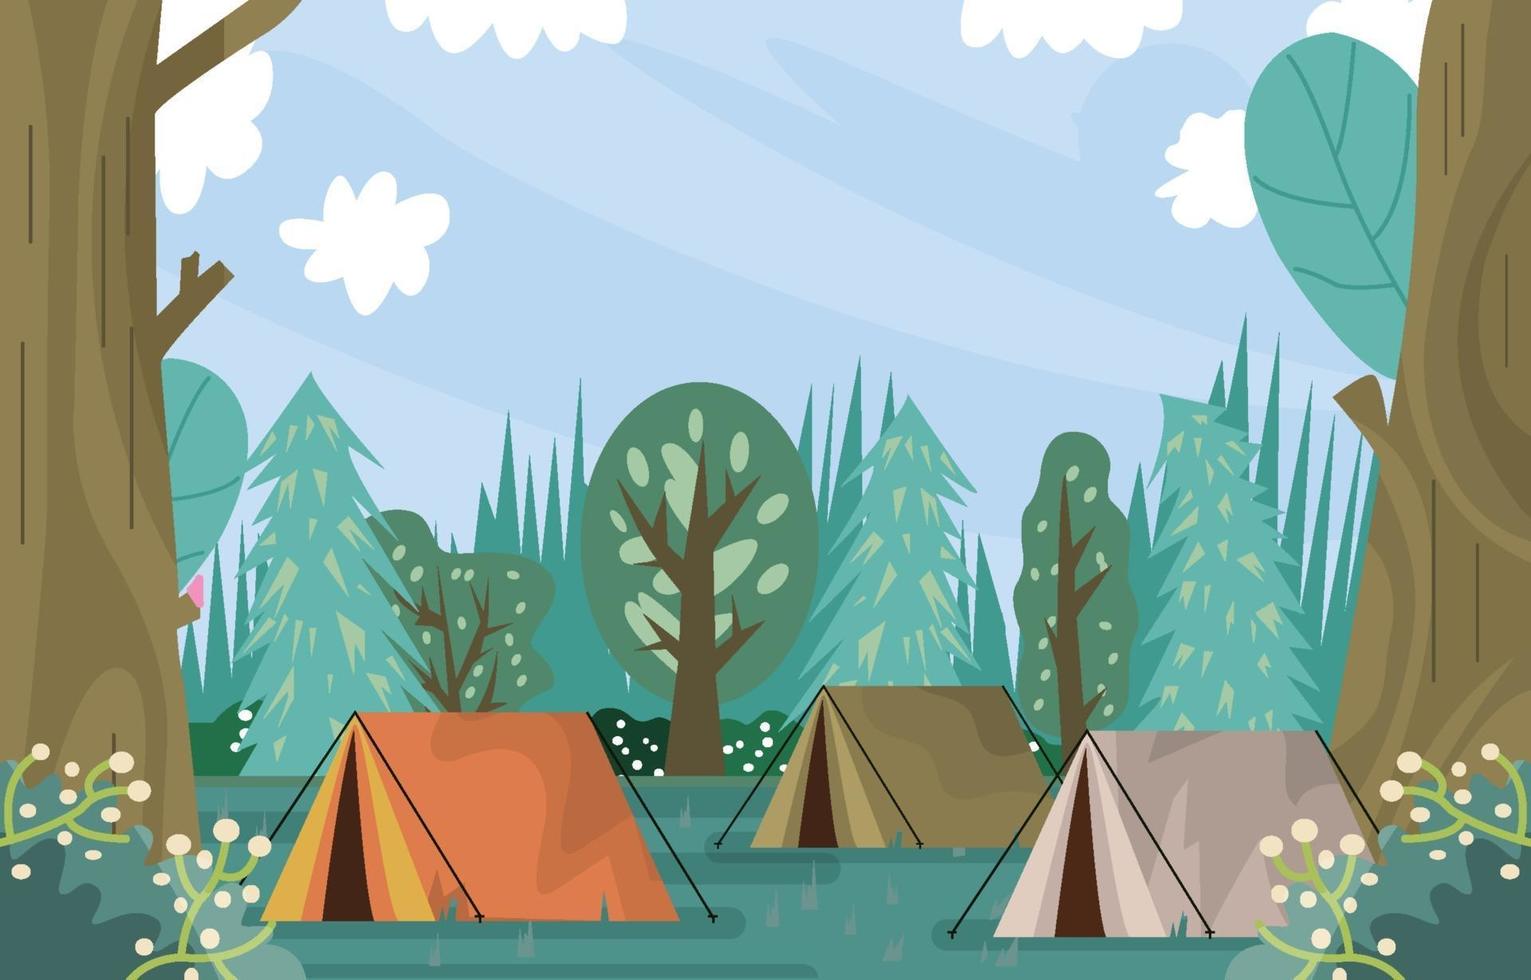 Tents in the Forest on The Summer Time vector